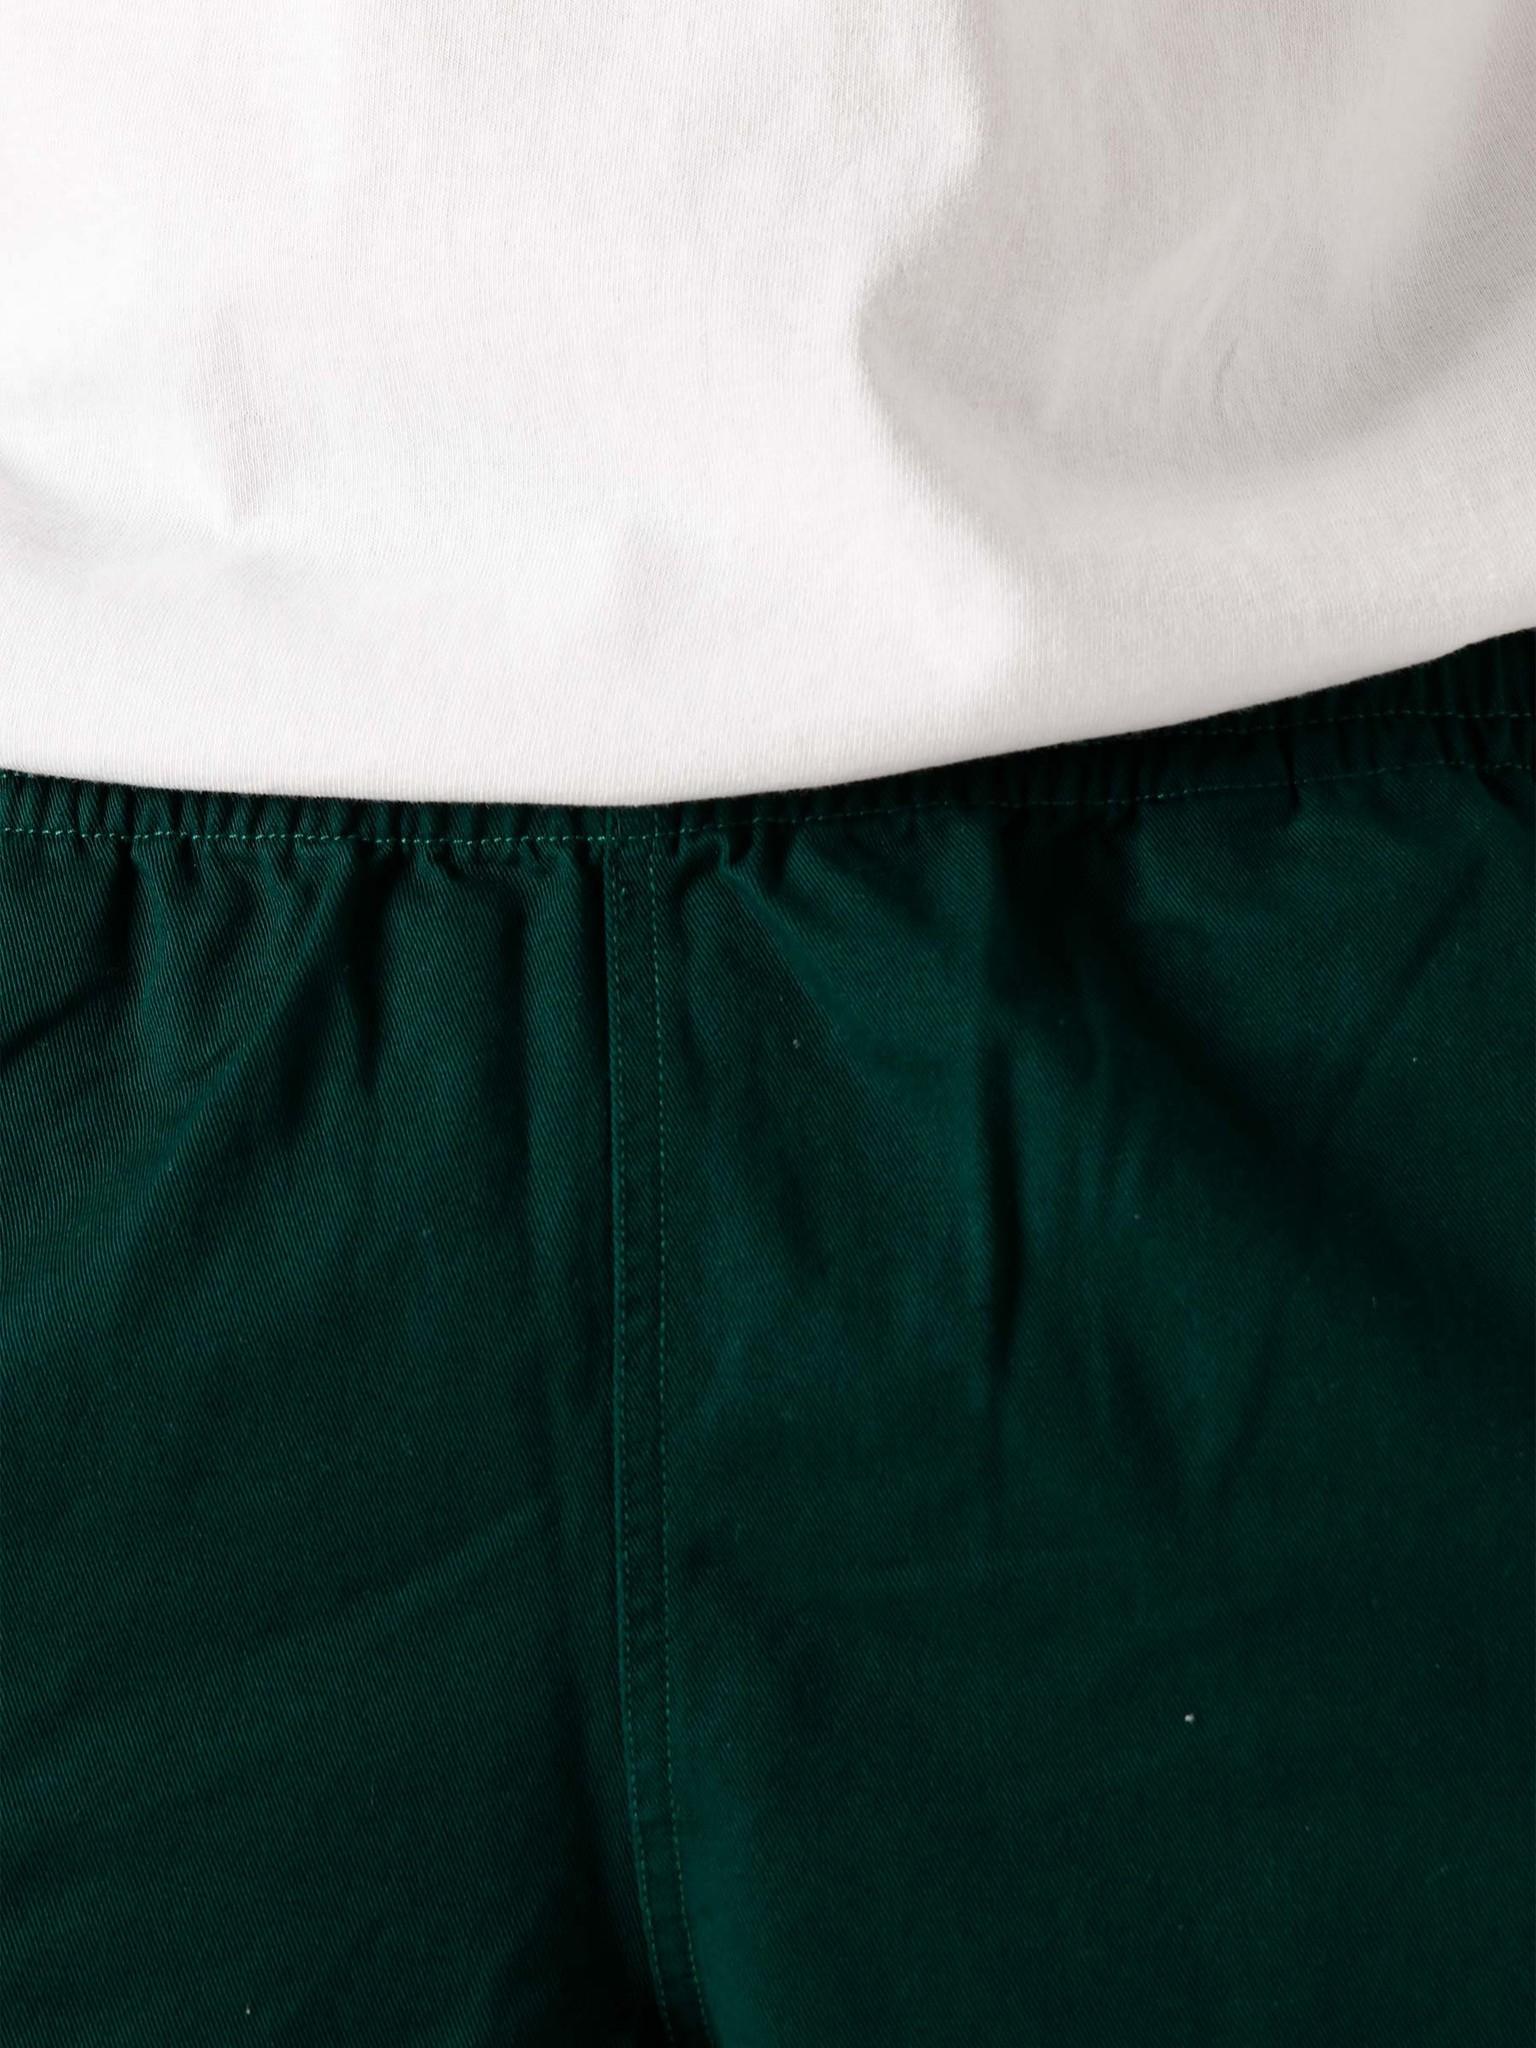 Easy Relaxed Twill Short Green 172120057-GGN